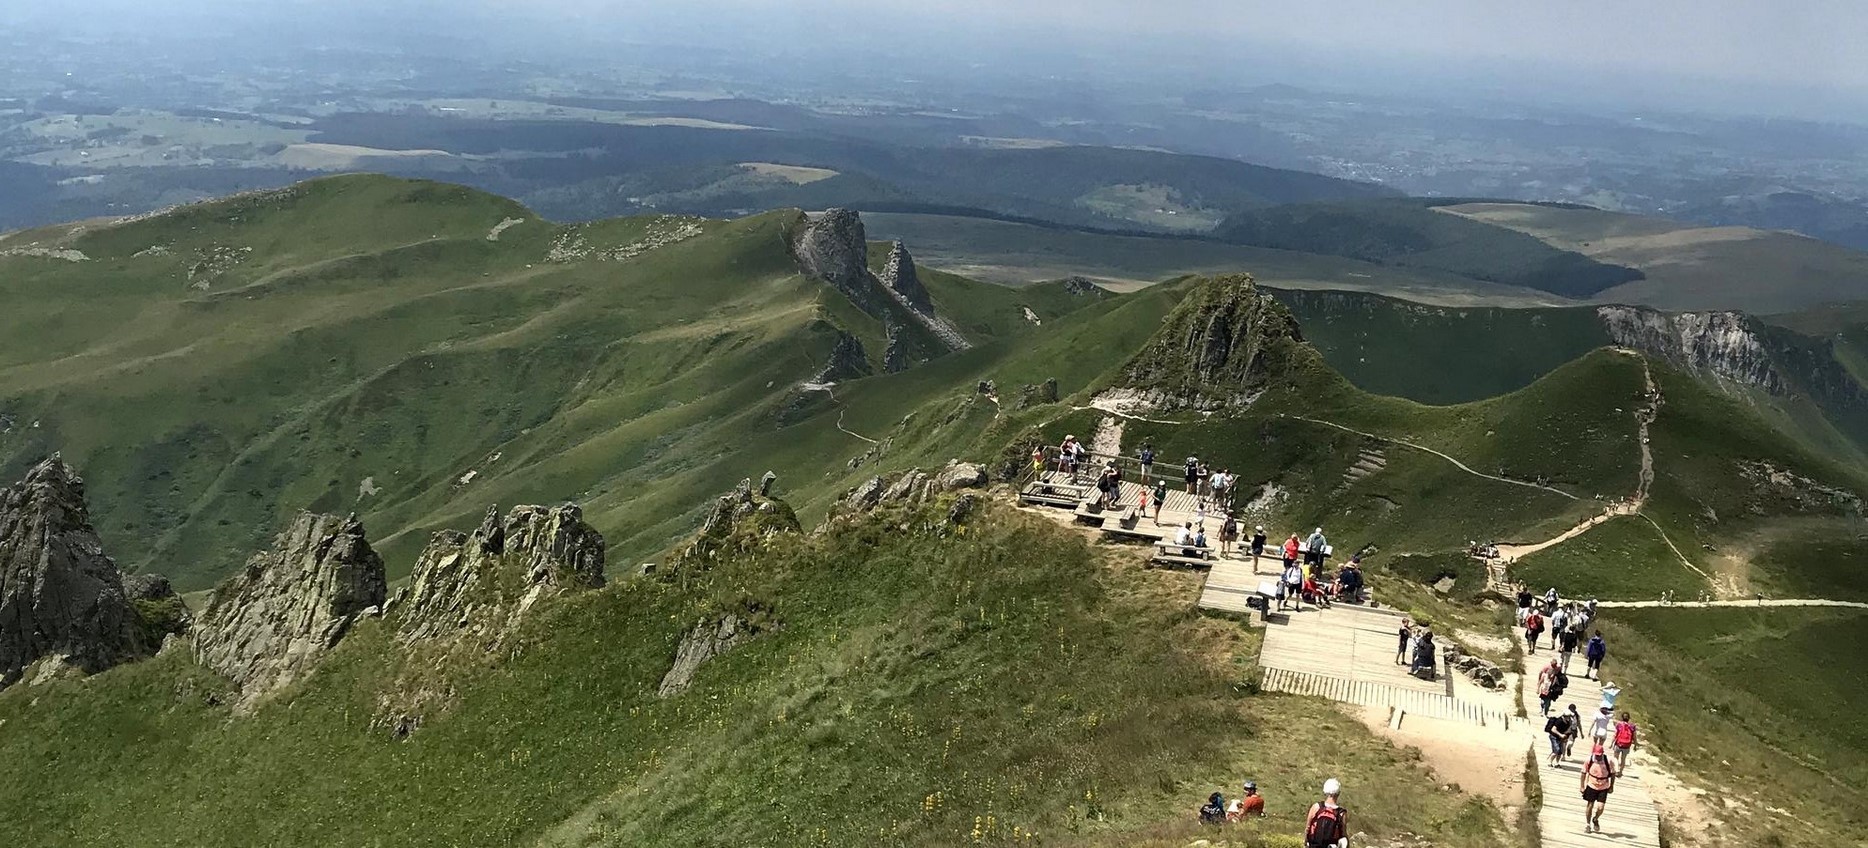 Summit of the Puy de Sancy, view of the Puy de l'Ane, the Puy Redon and the ridge path